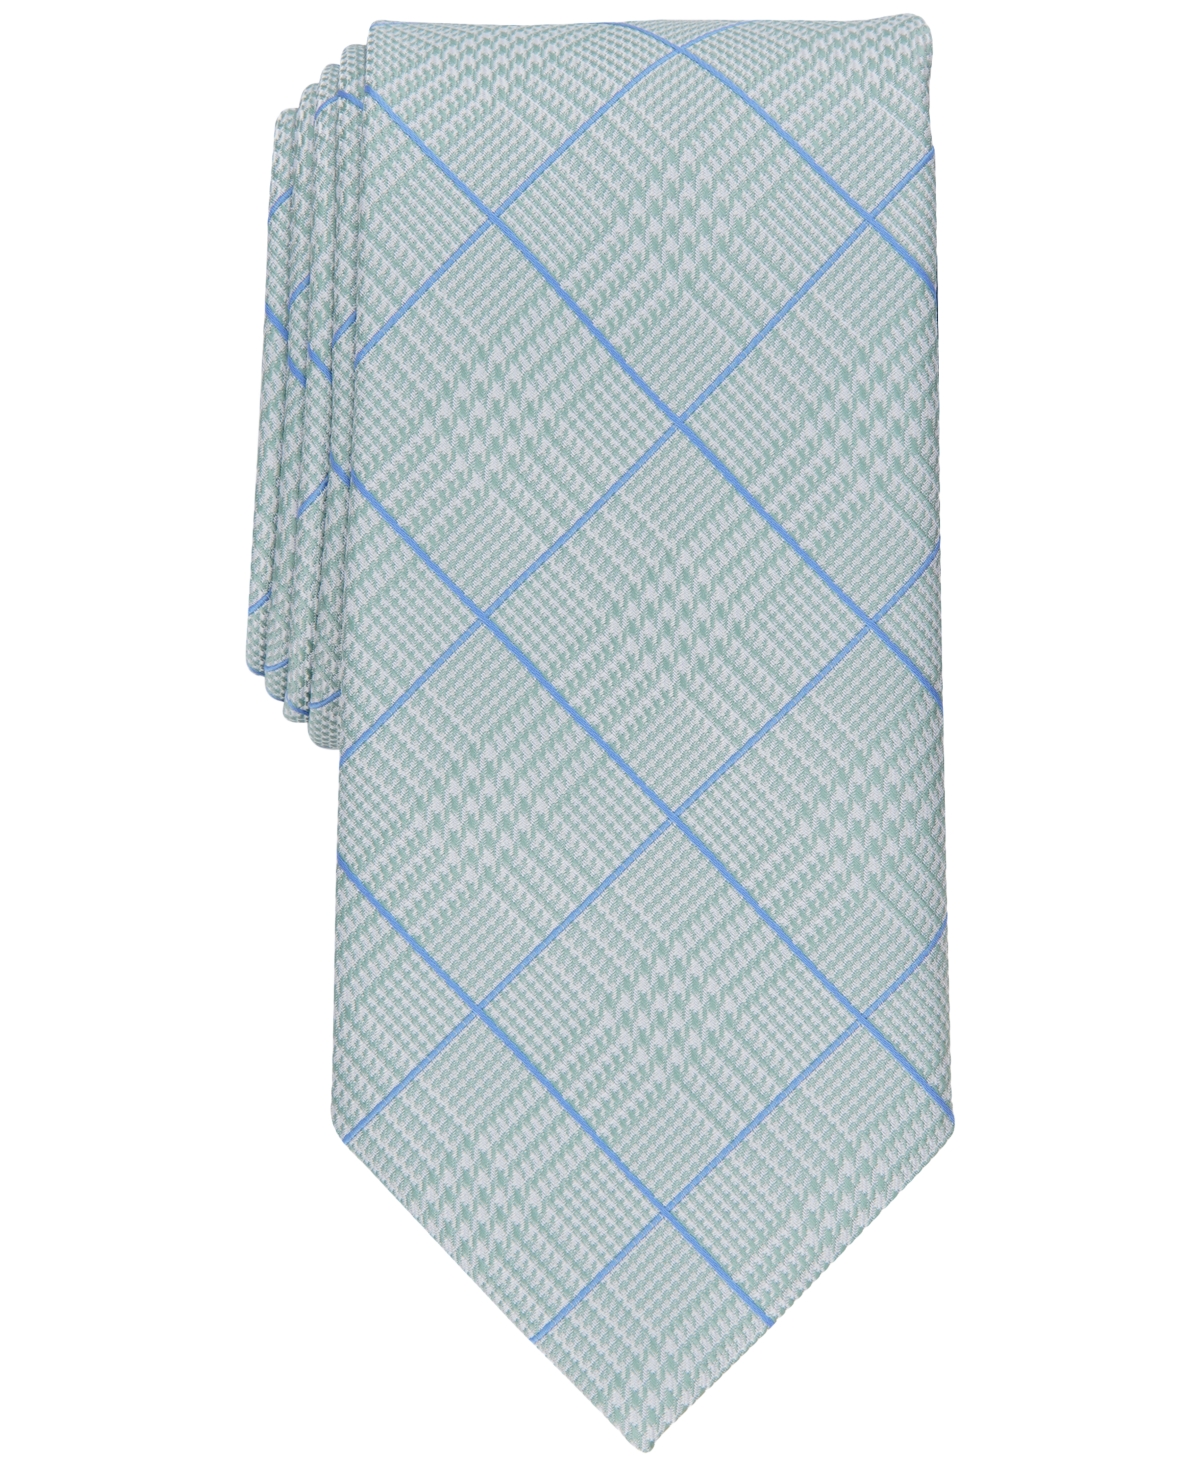 Men's Plaid Tie, Created for Macy's - Mint